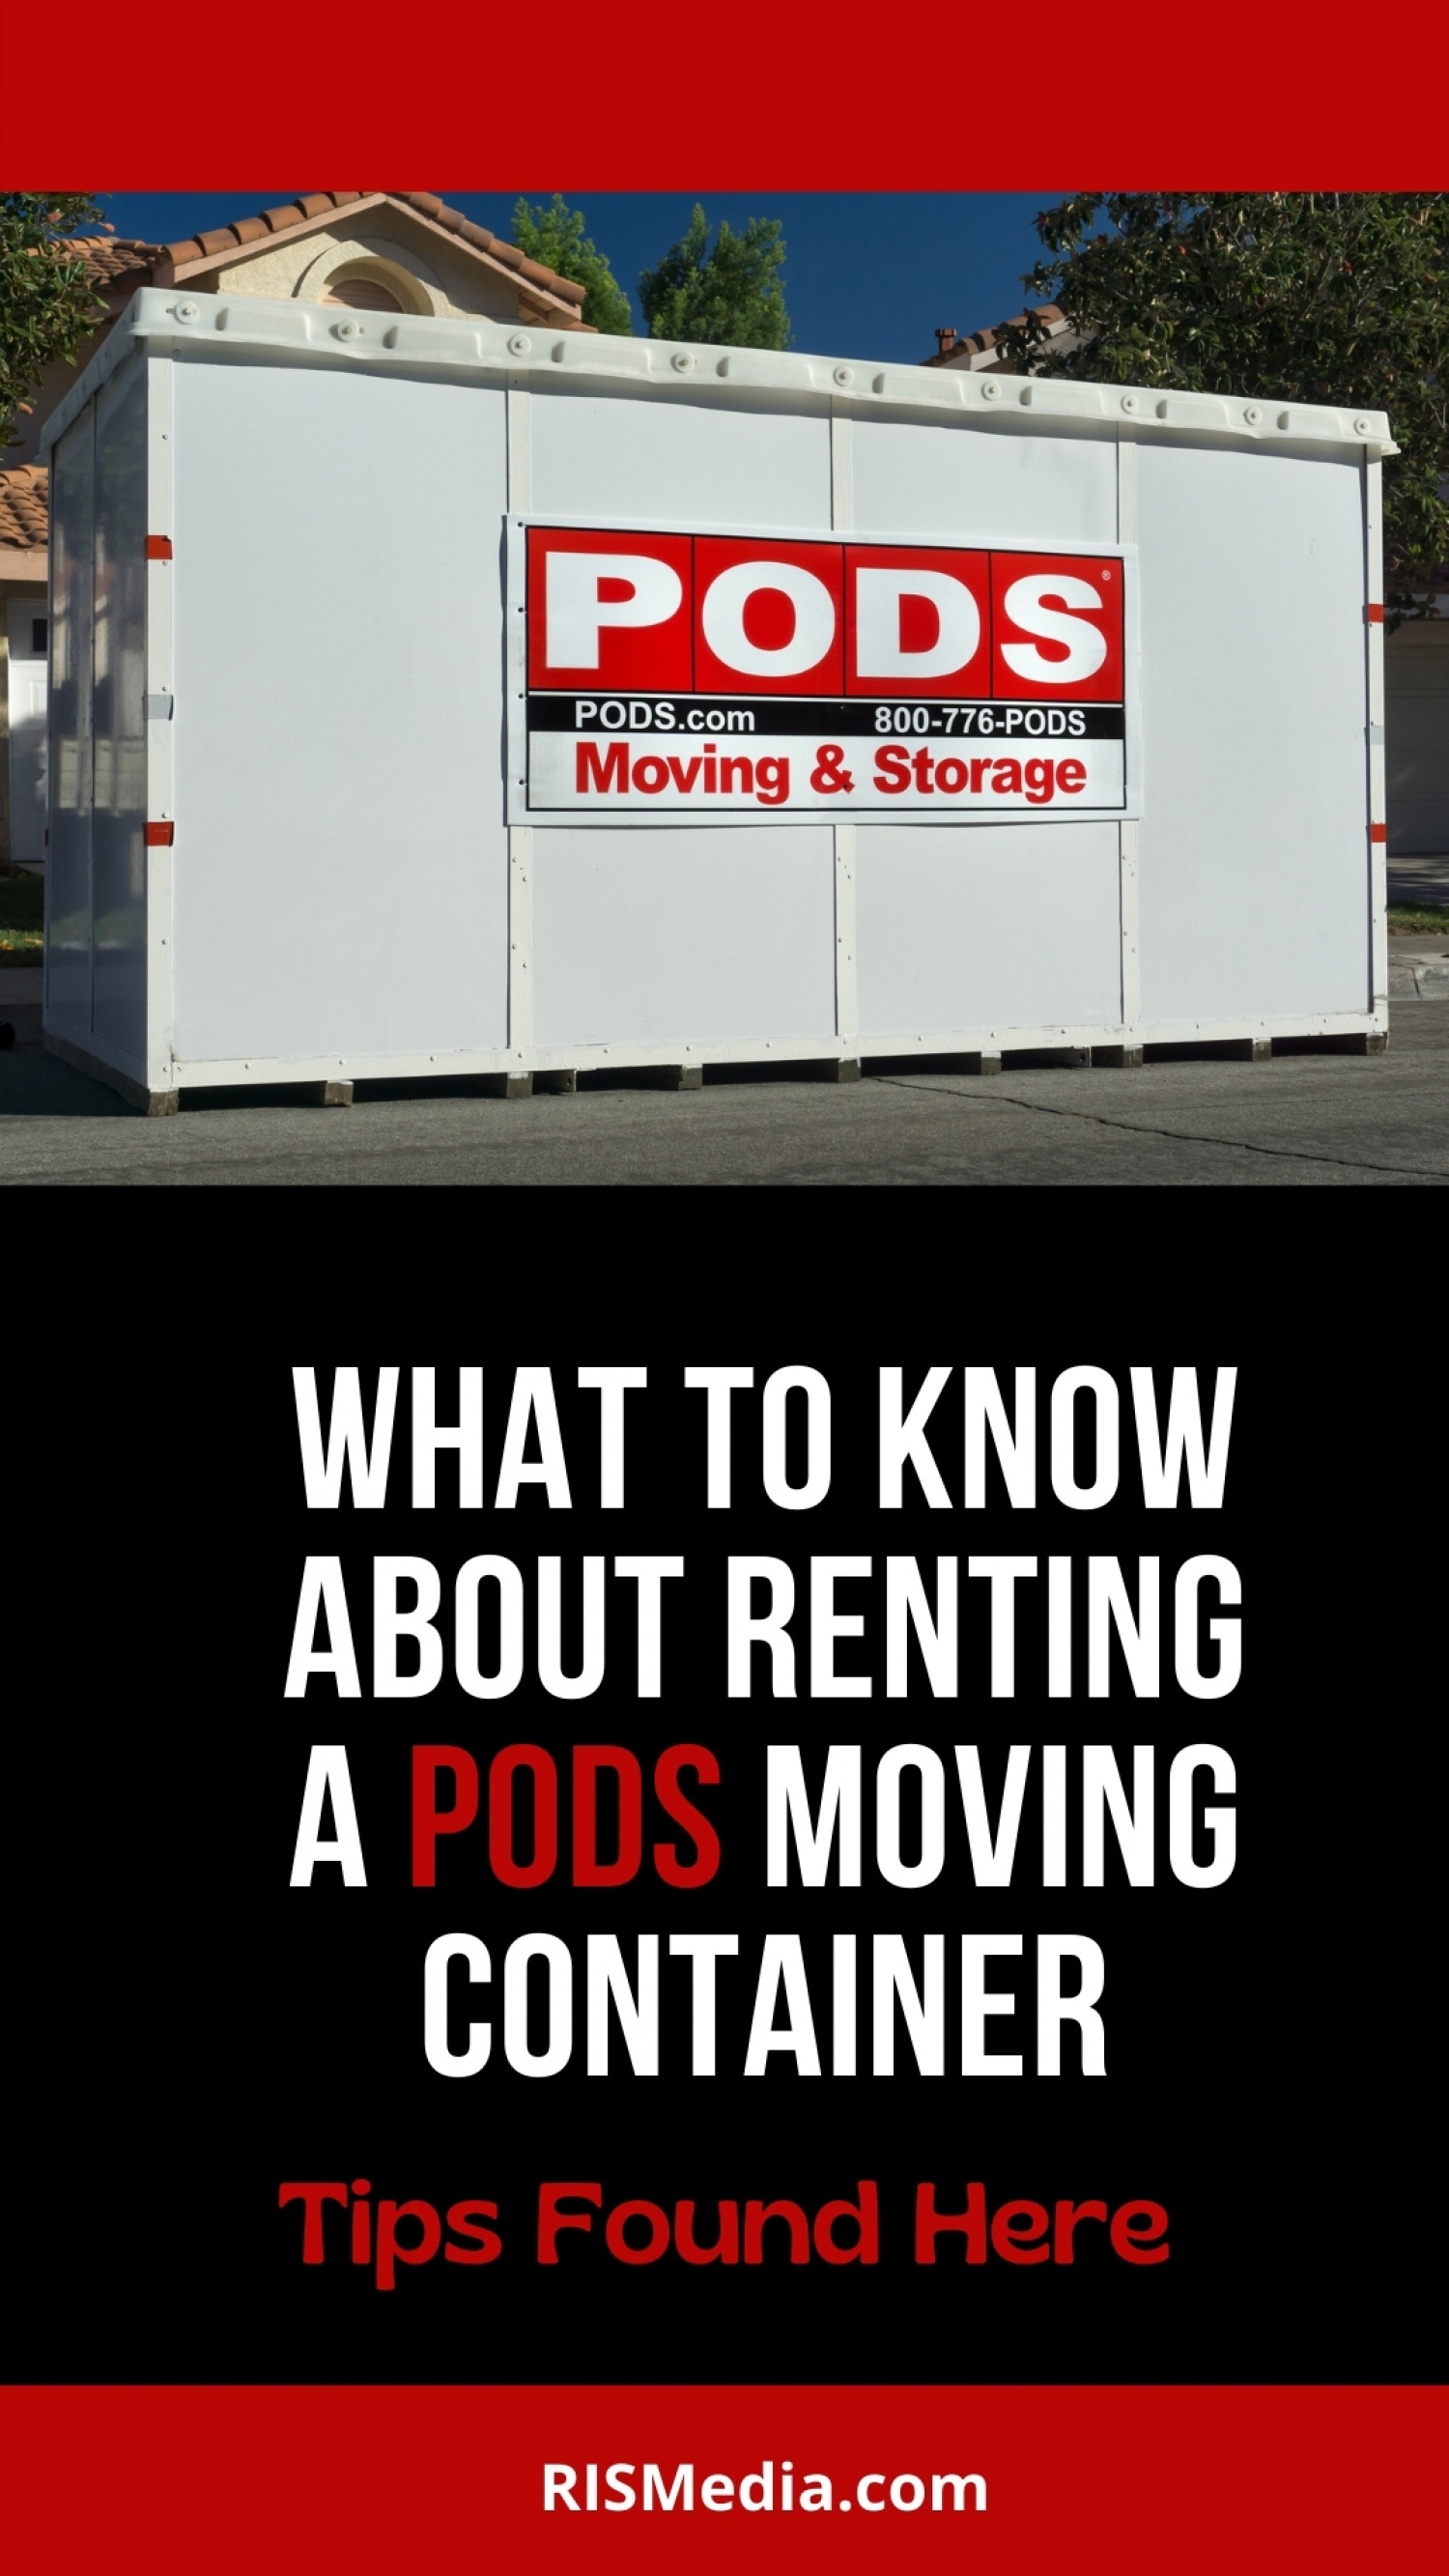 What to Know About Renting a PODS Moving Container Infographic